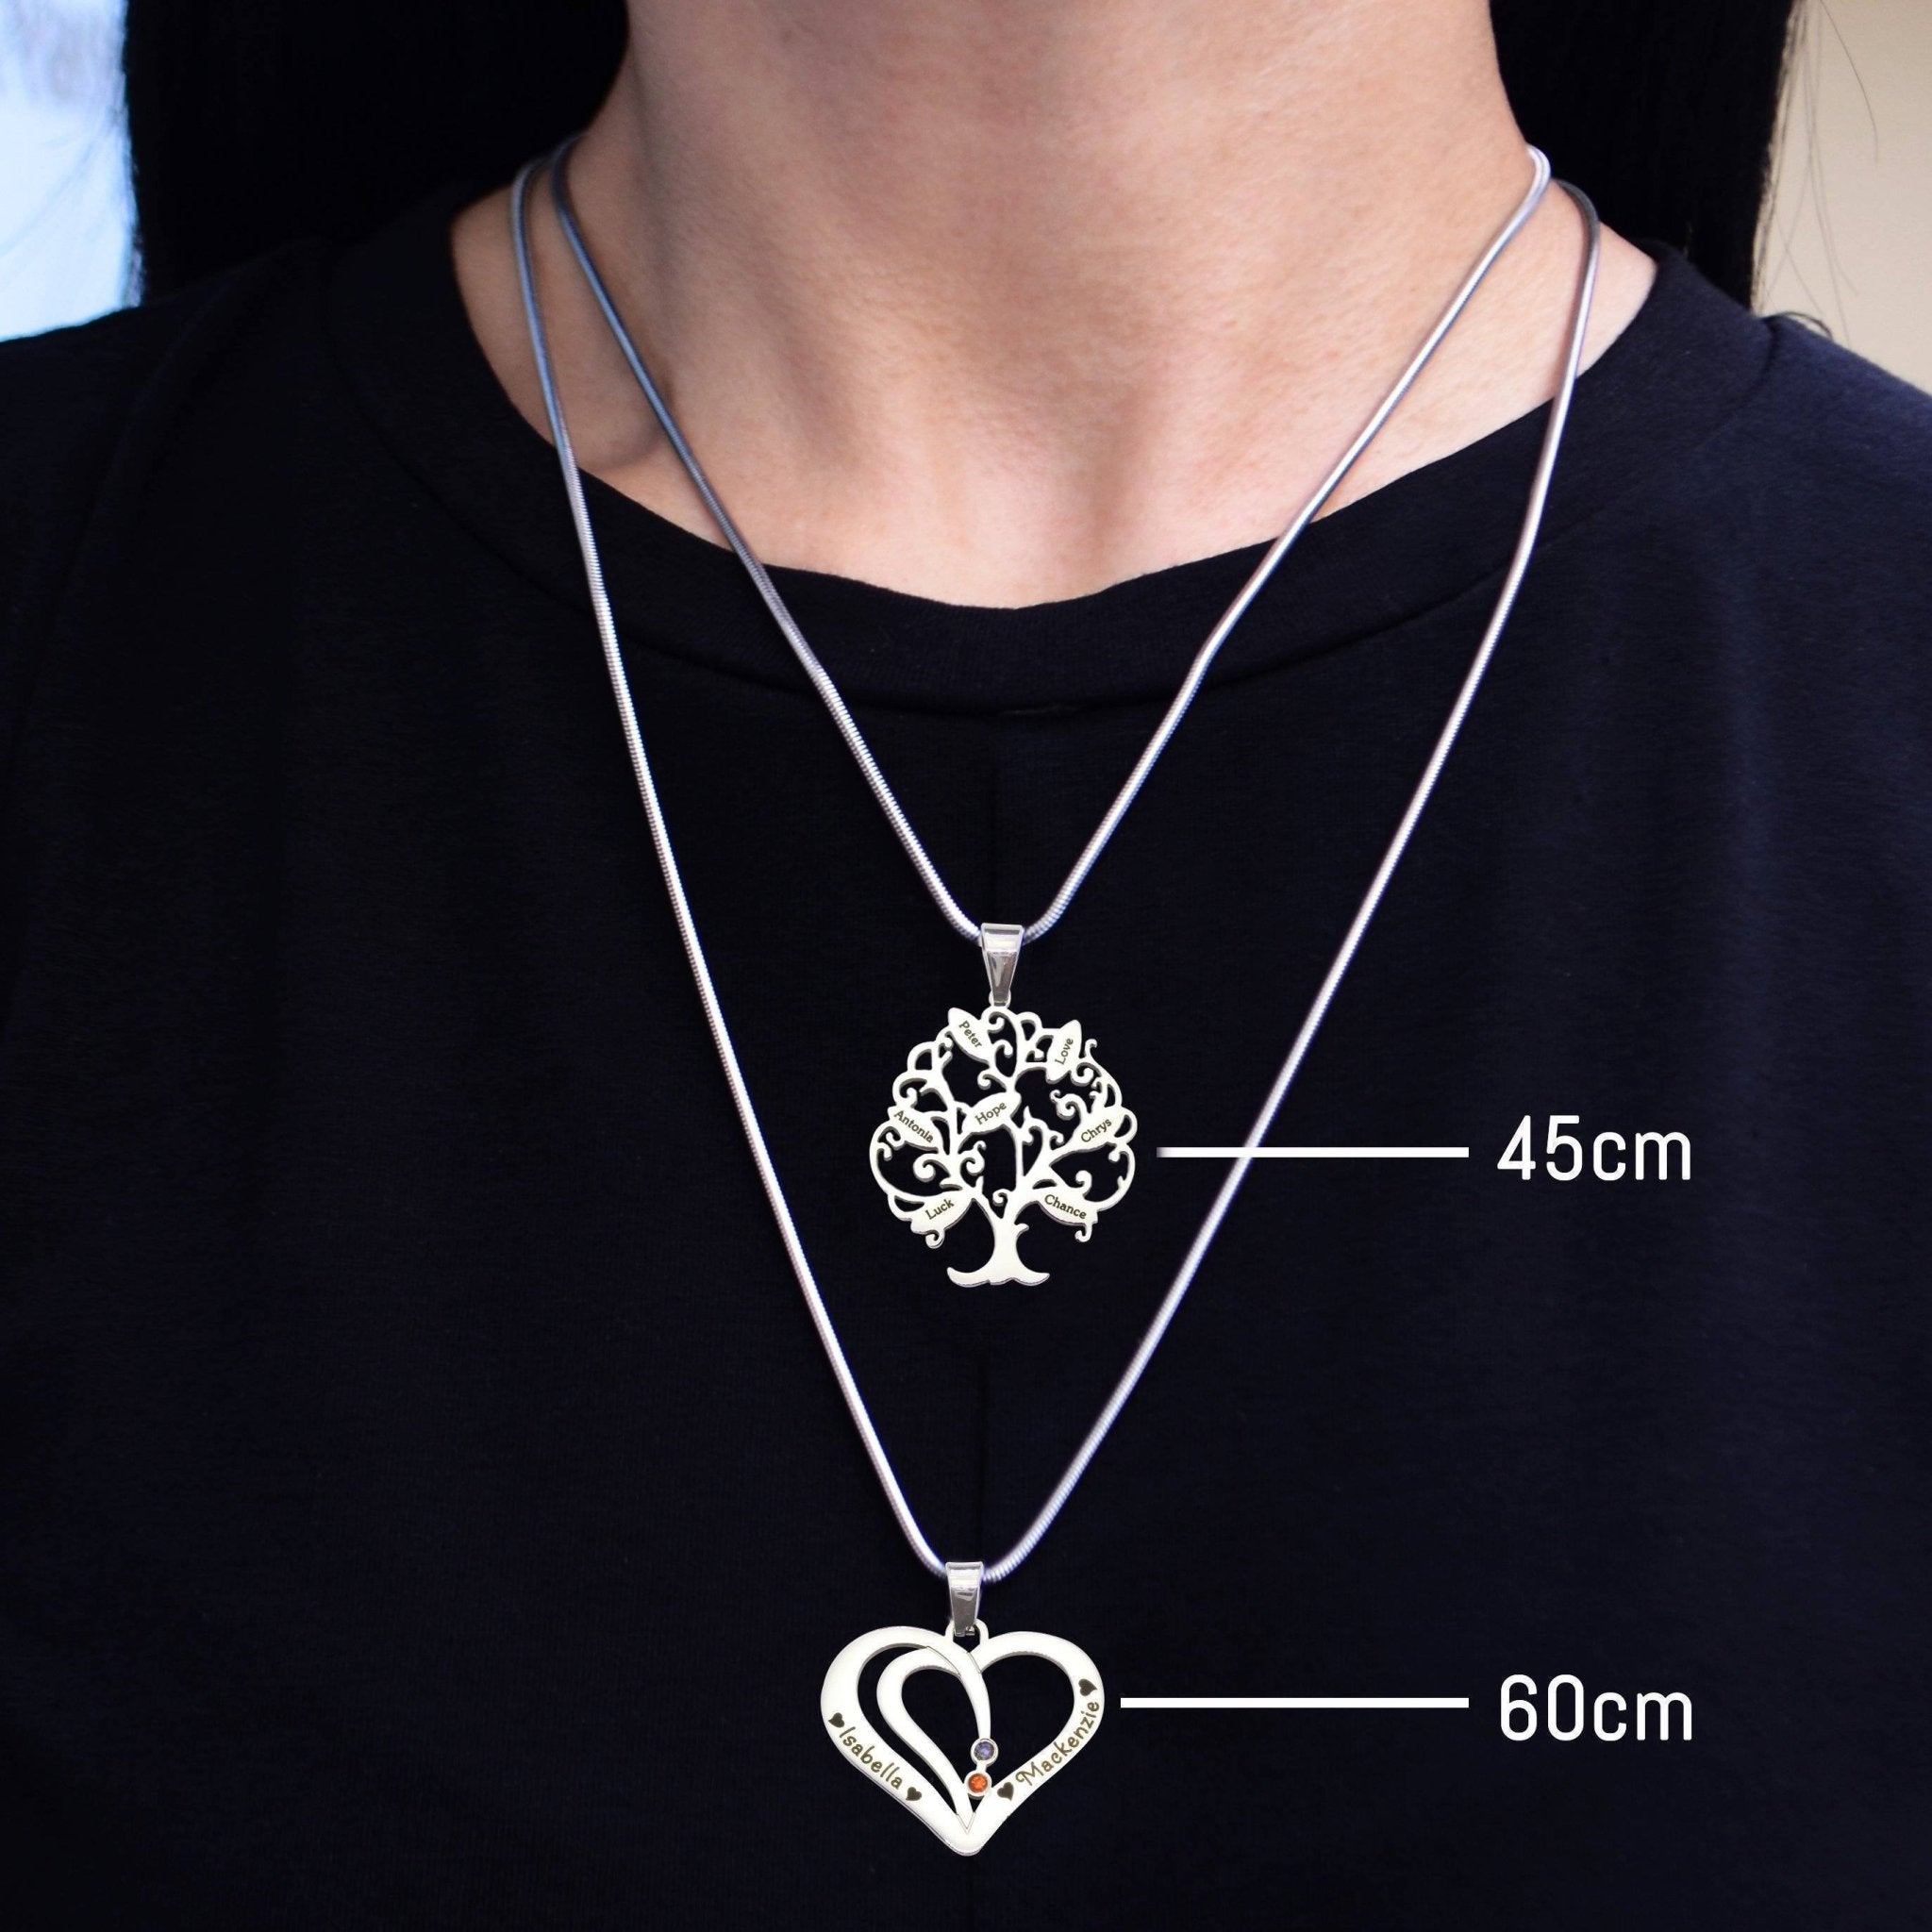 Disc Photo Necklace - Photo Jewellery by Belle Fever